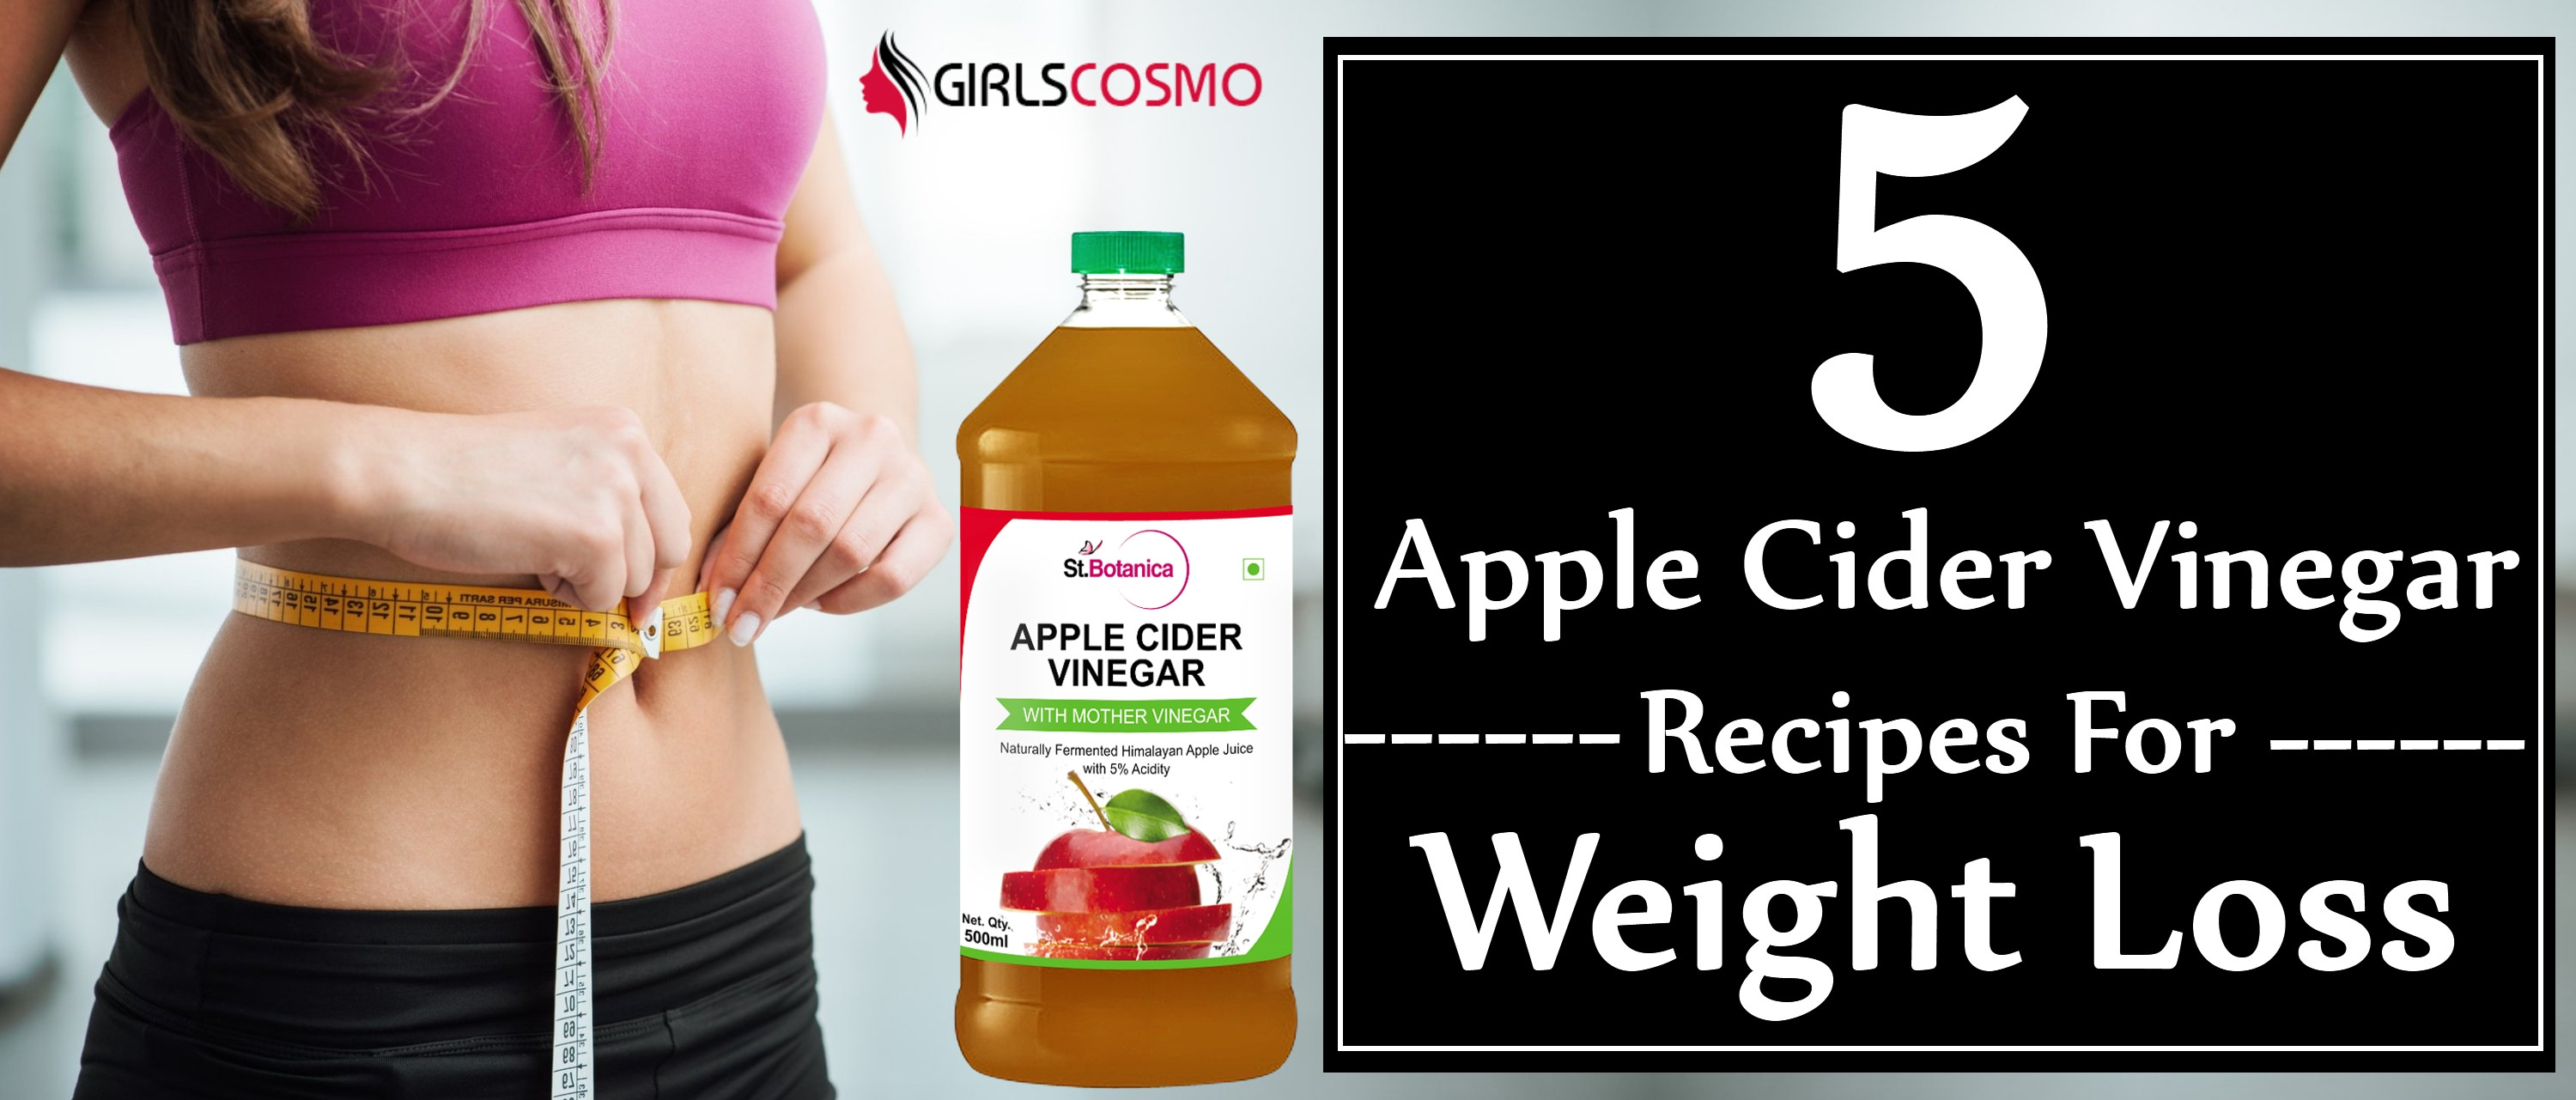 Apple Cider Vinegar Recipes For Weight Loss
 Weight Loss Diet Home Reme s